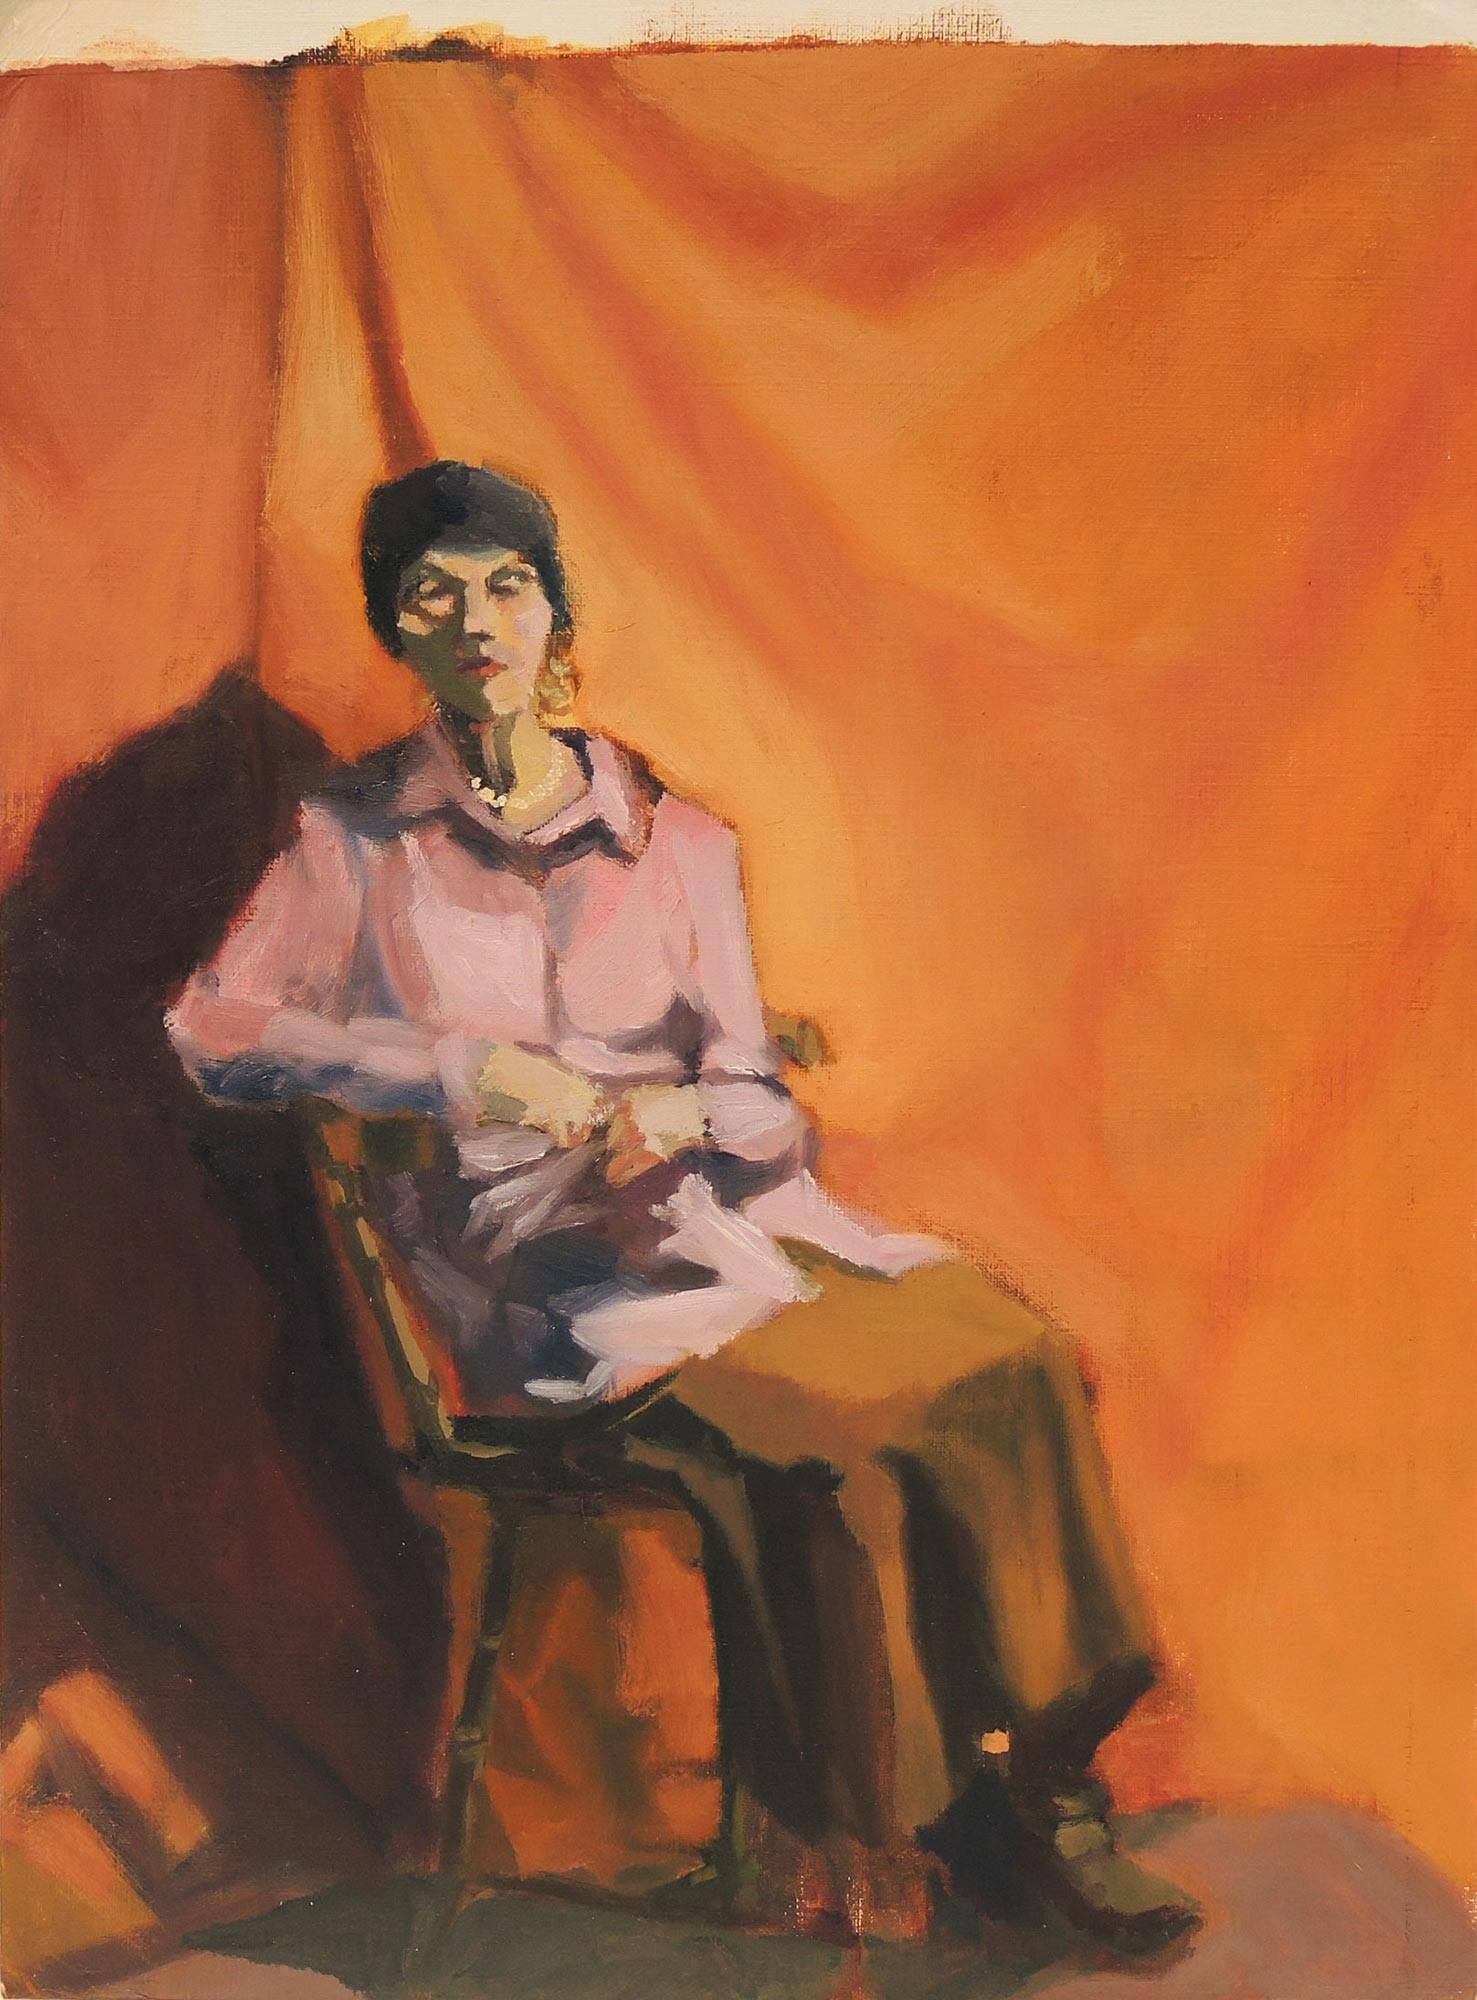 A painting by Robert Gomez of a woman sitting